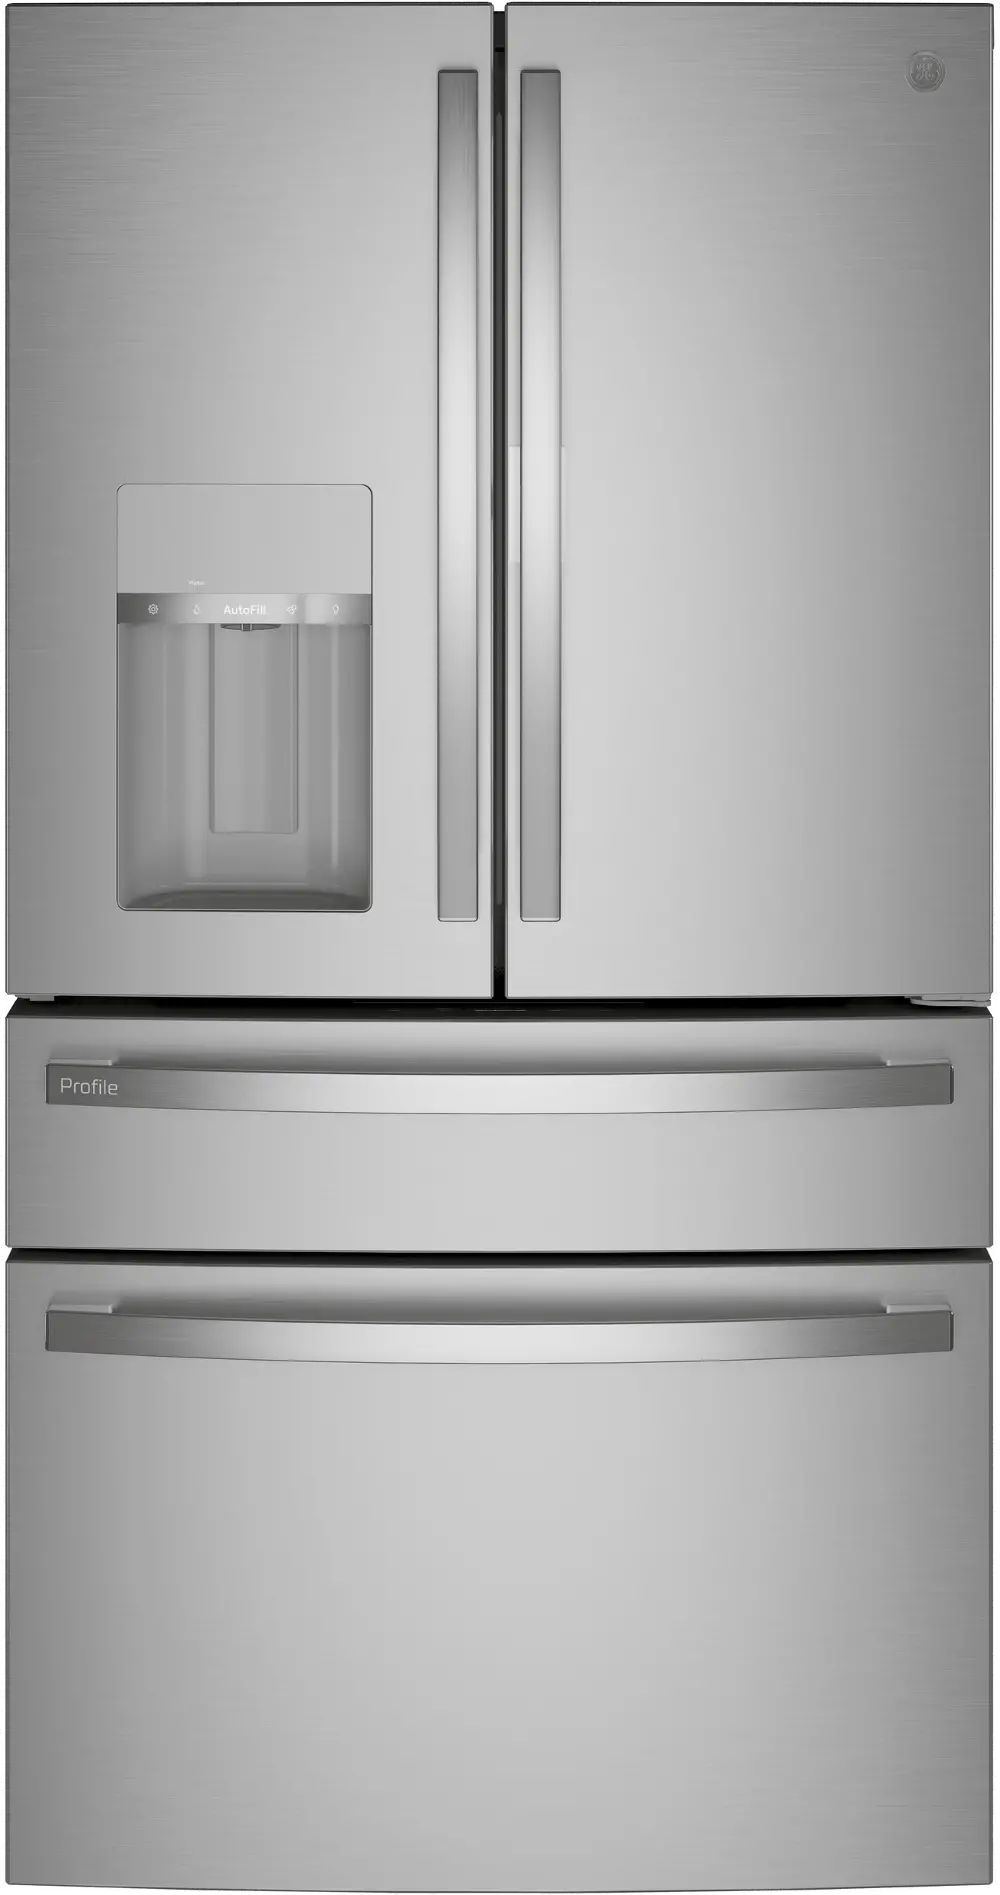 PVD28BYNFS GE Profile 27.9 cu ft French Door Refrigerator - Stainless Steel-1